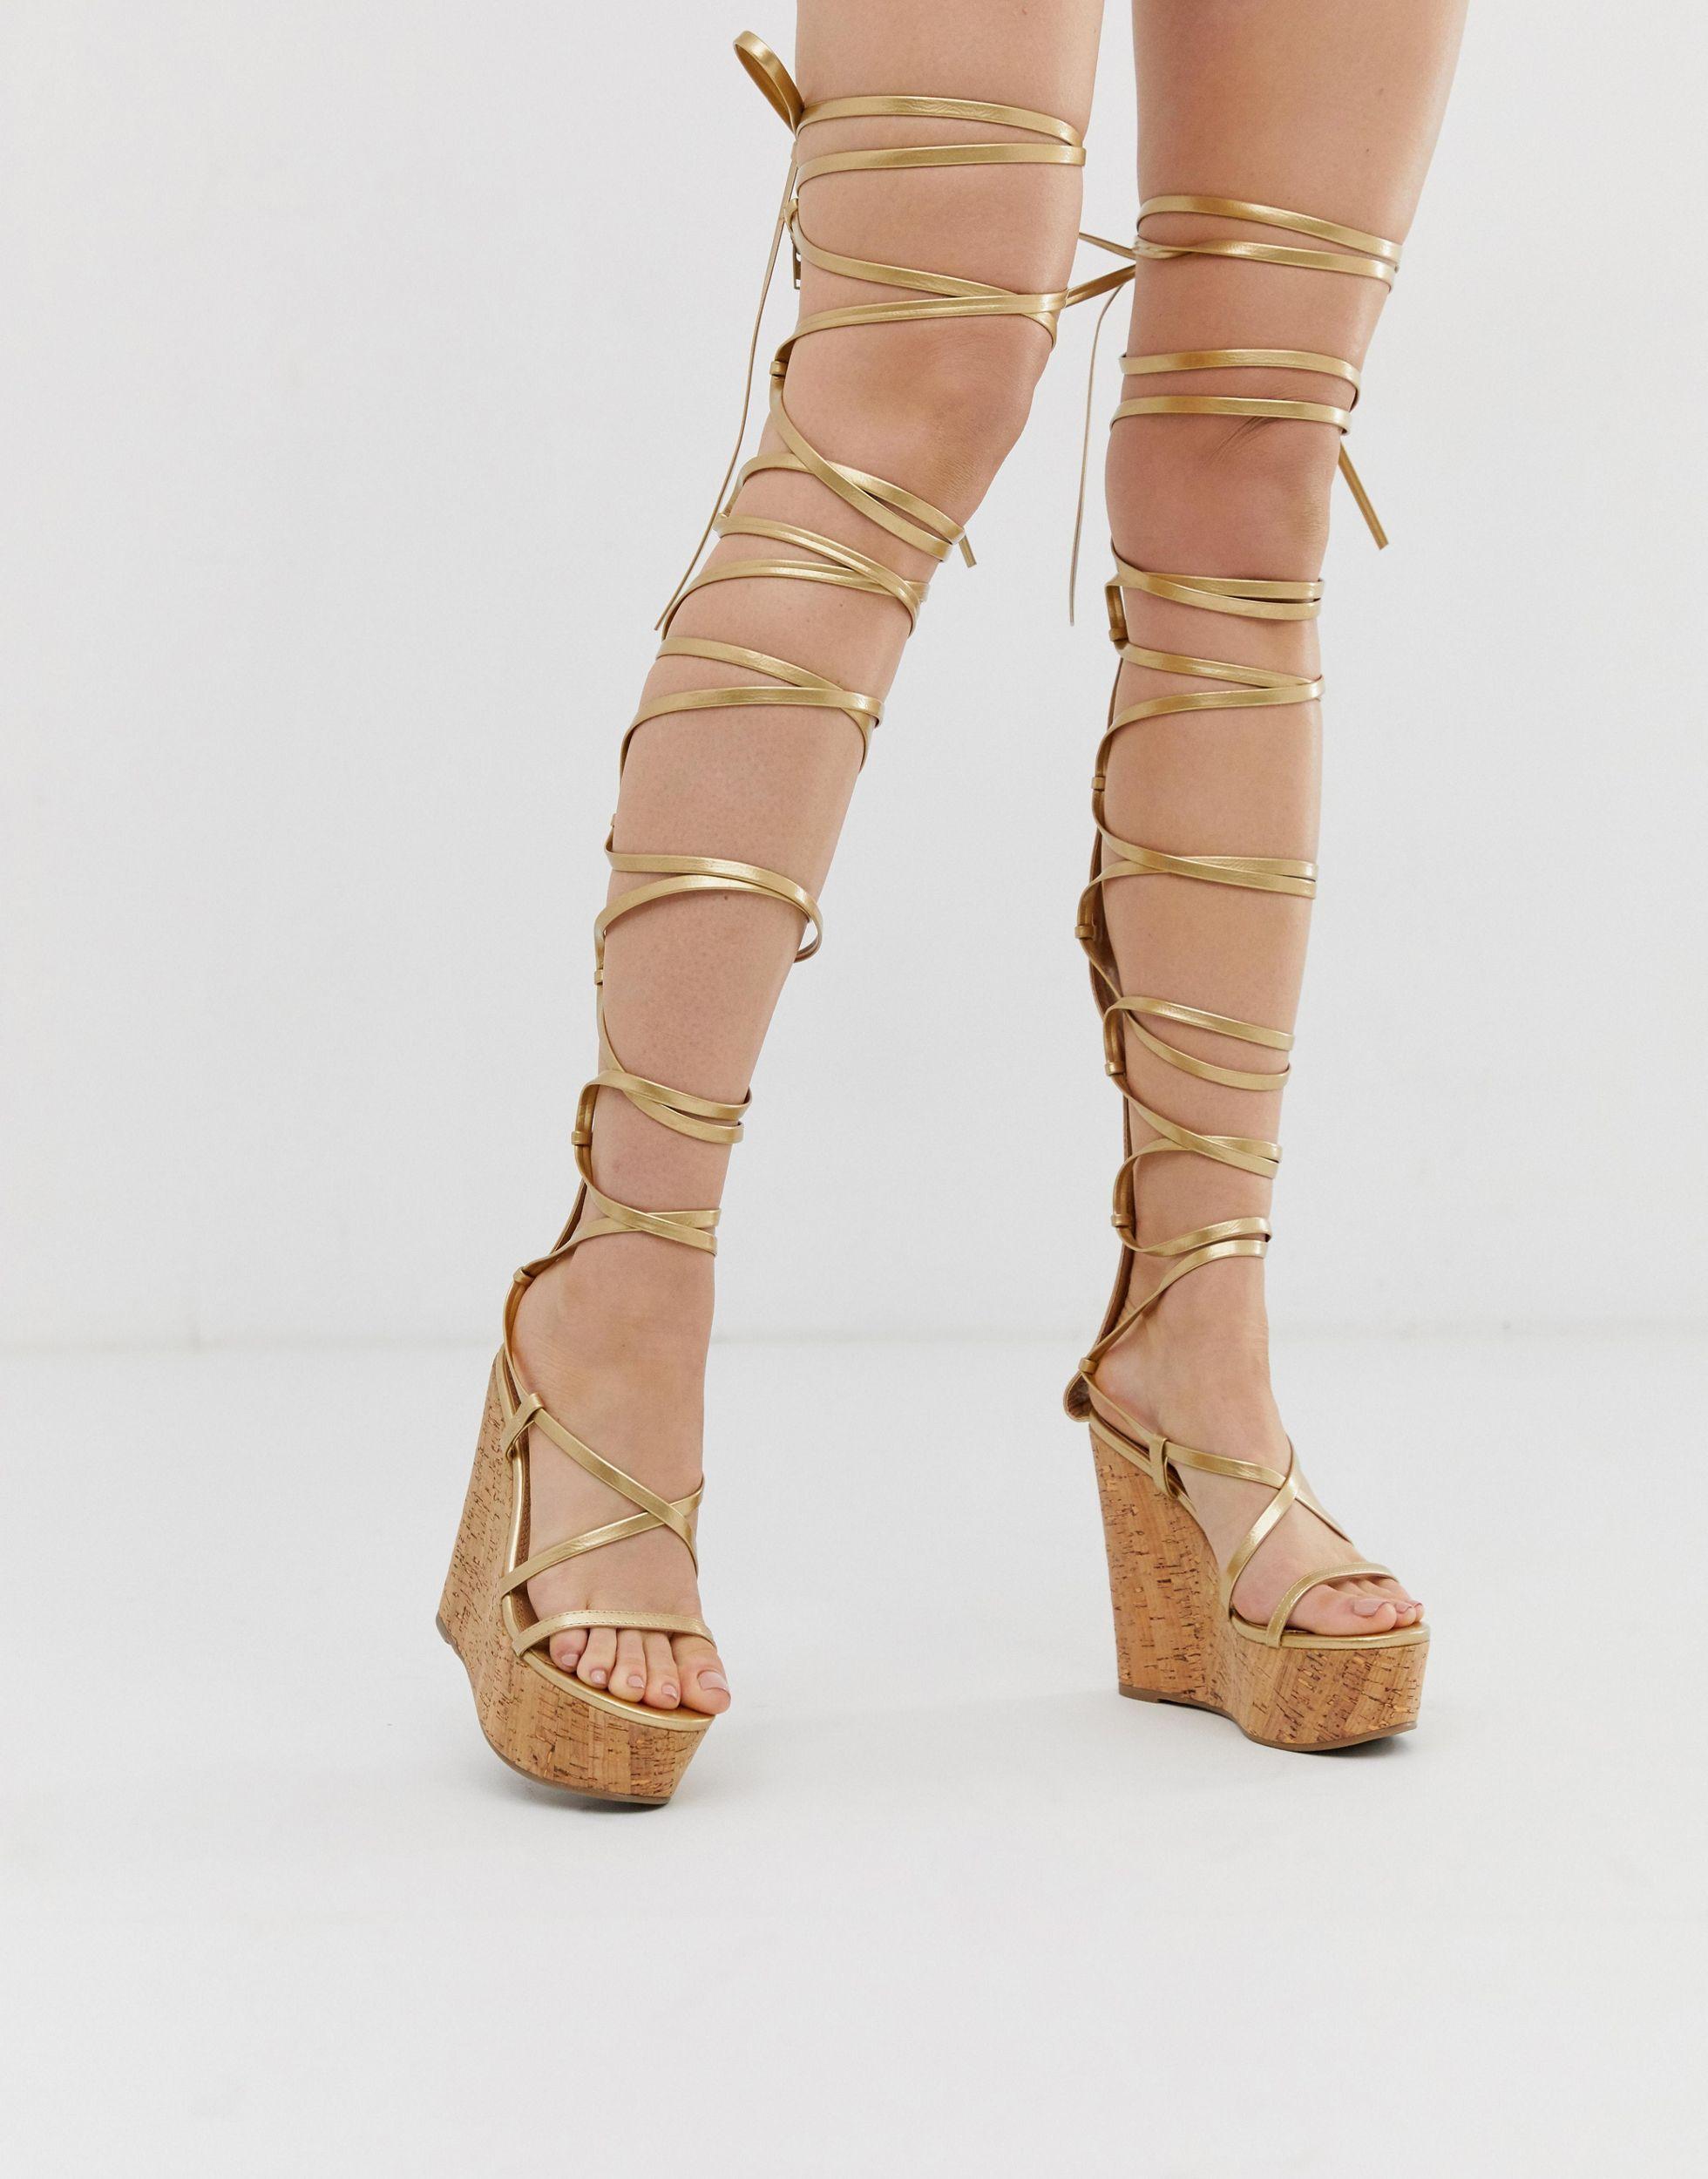 ASOS Leather Trinity Gladiator Wedges in Gold (Metallic) - Lyst